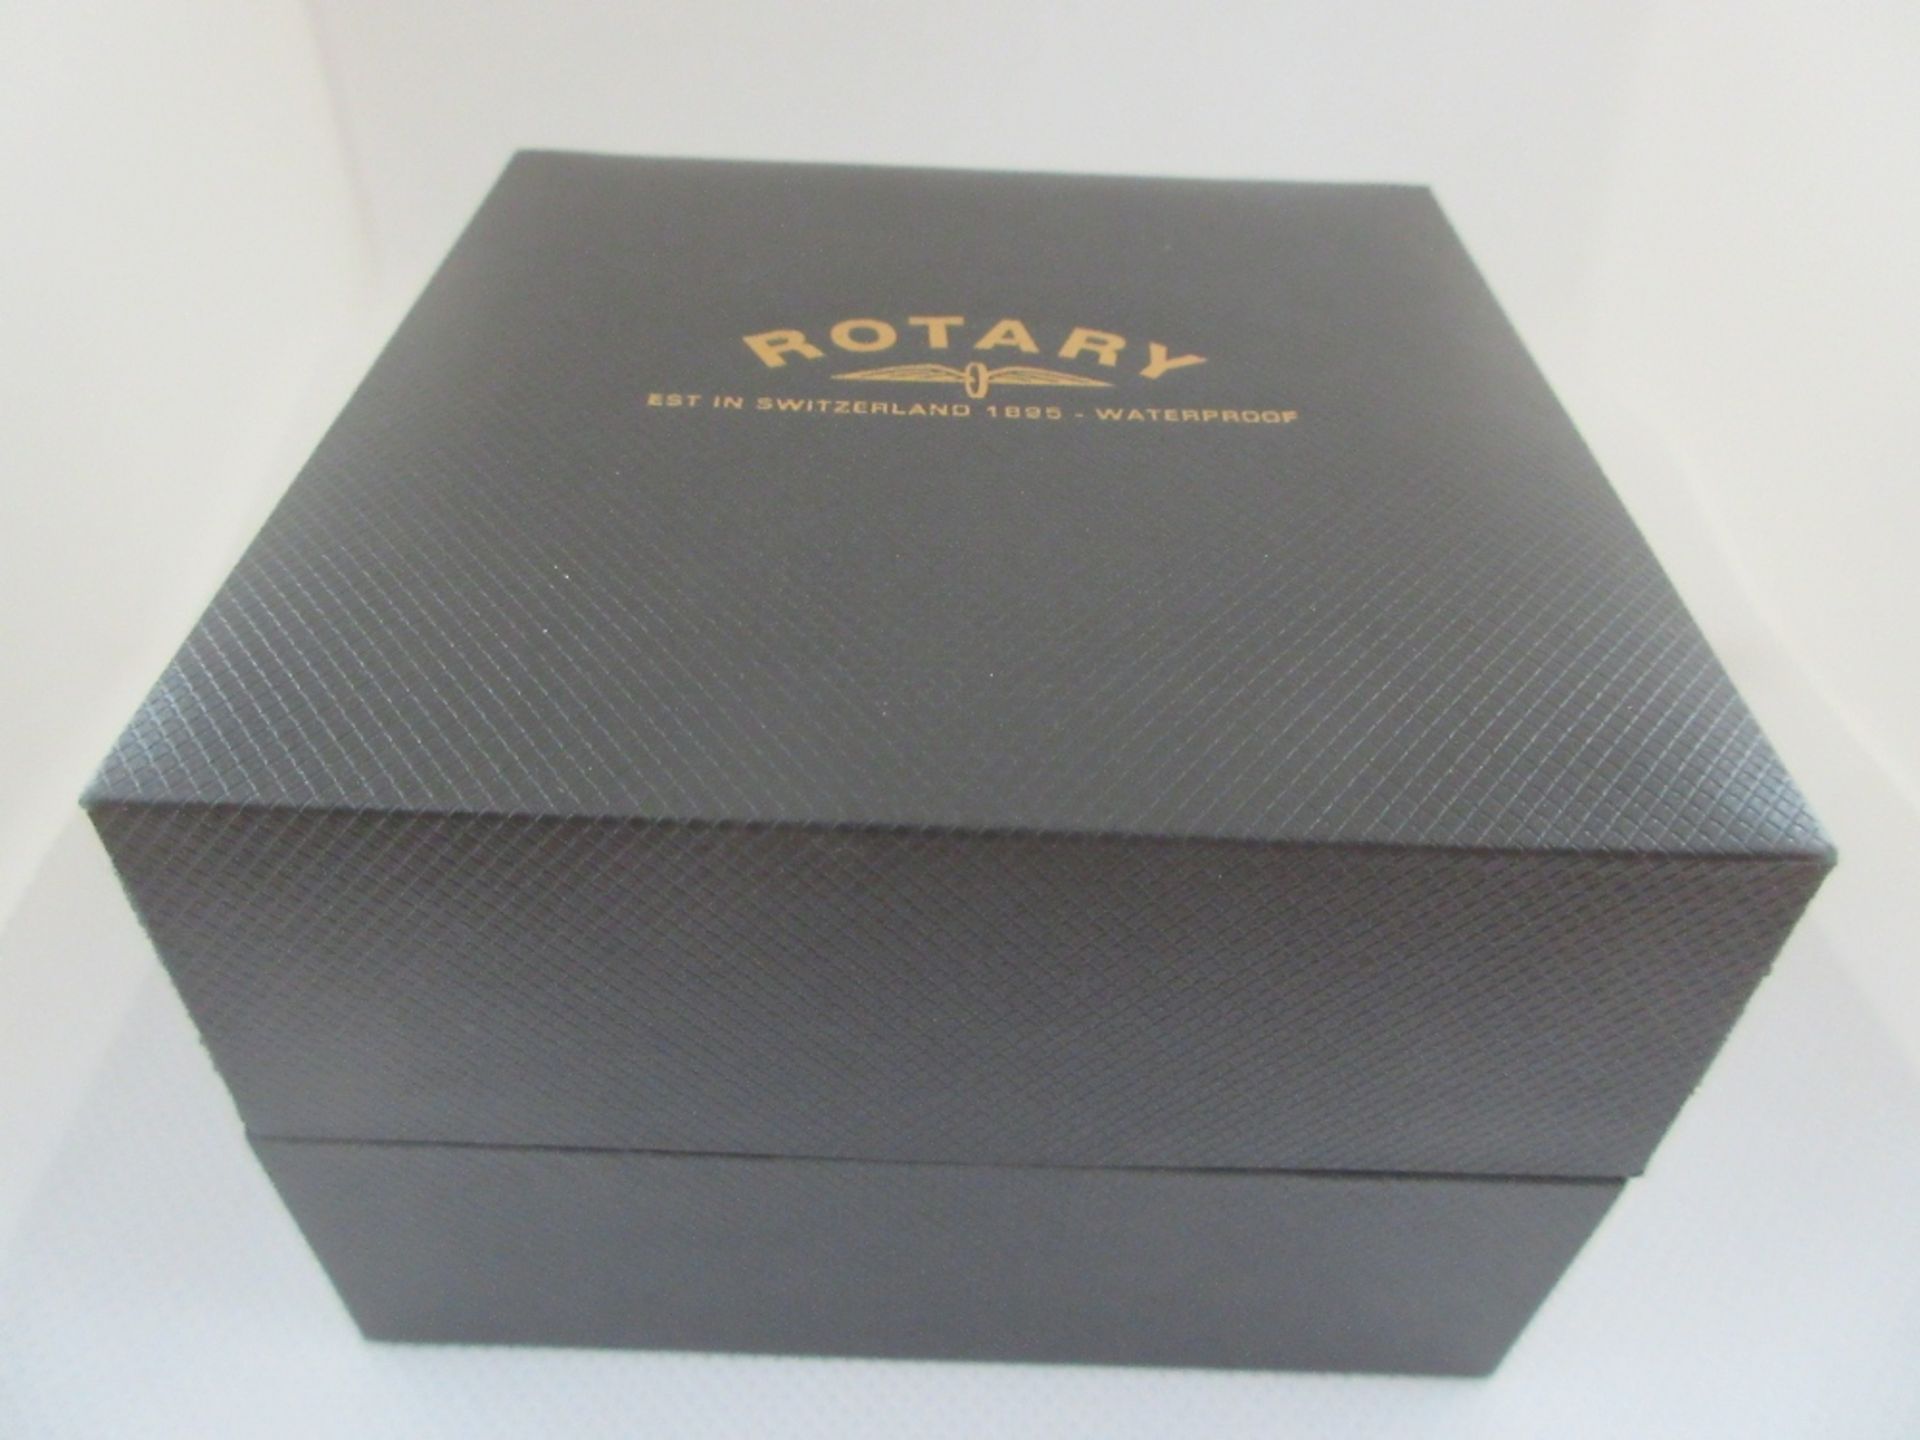 ROTARY MALE WATCH, MODEL GS02415/18, CASE DIAMETER 38MM, LEATHER STRAP, BOXED, RRP £ 119 - Image 4 of 4